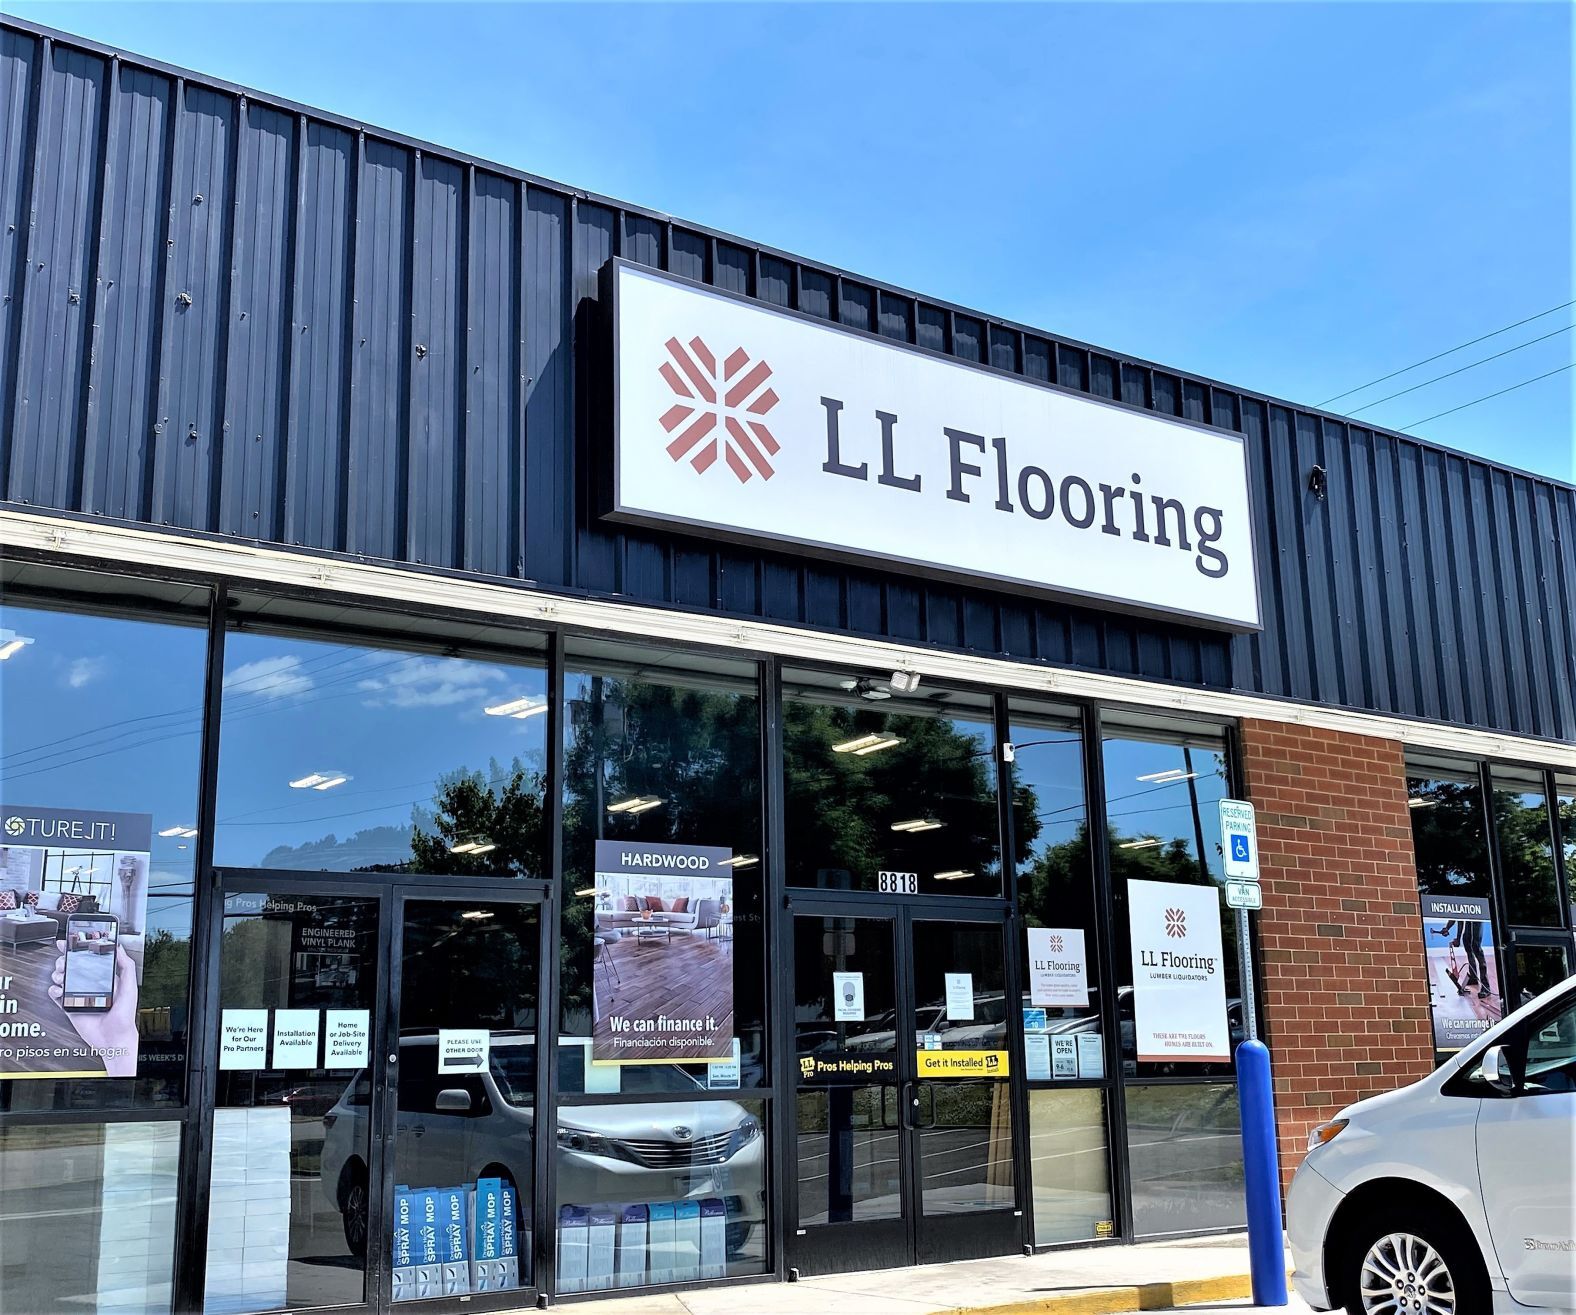 Customs questions some LL Flooring imports